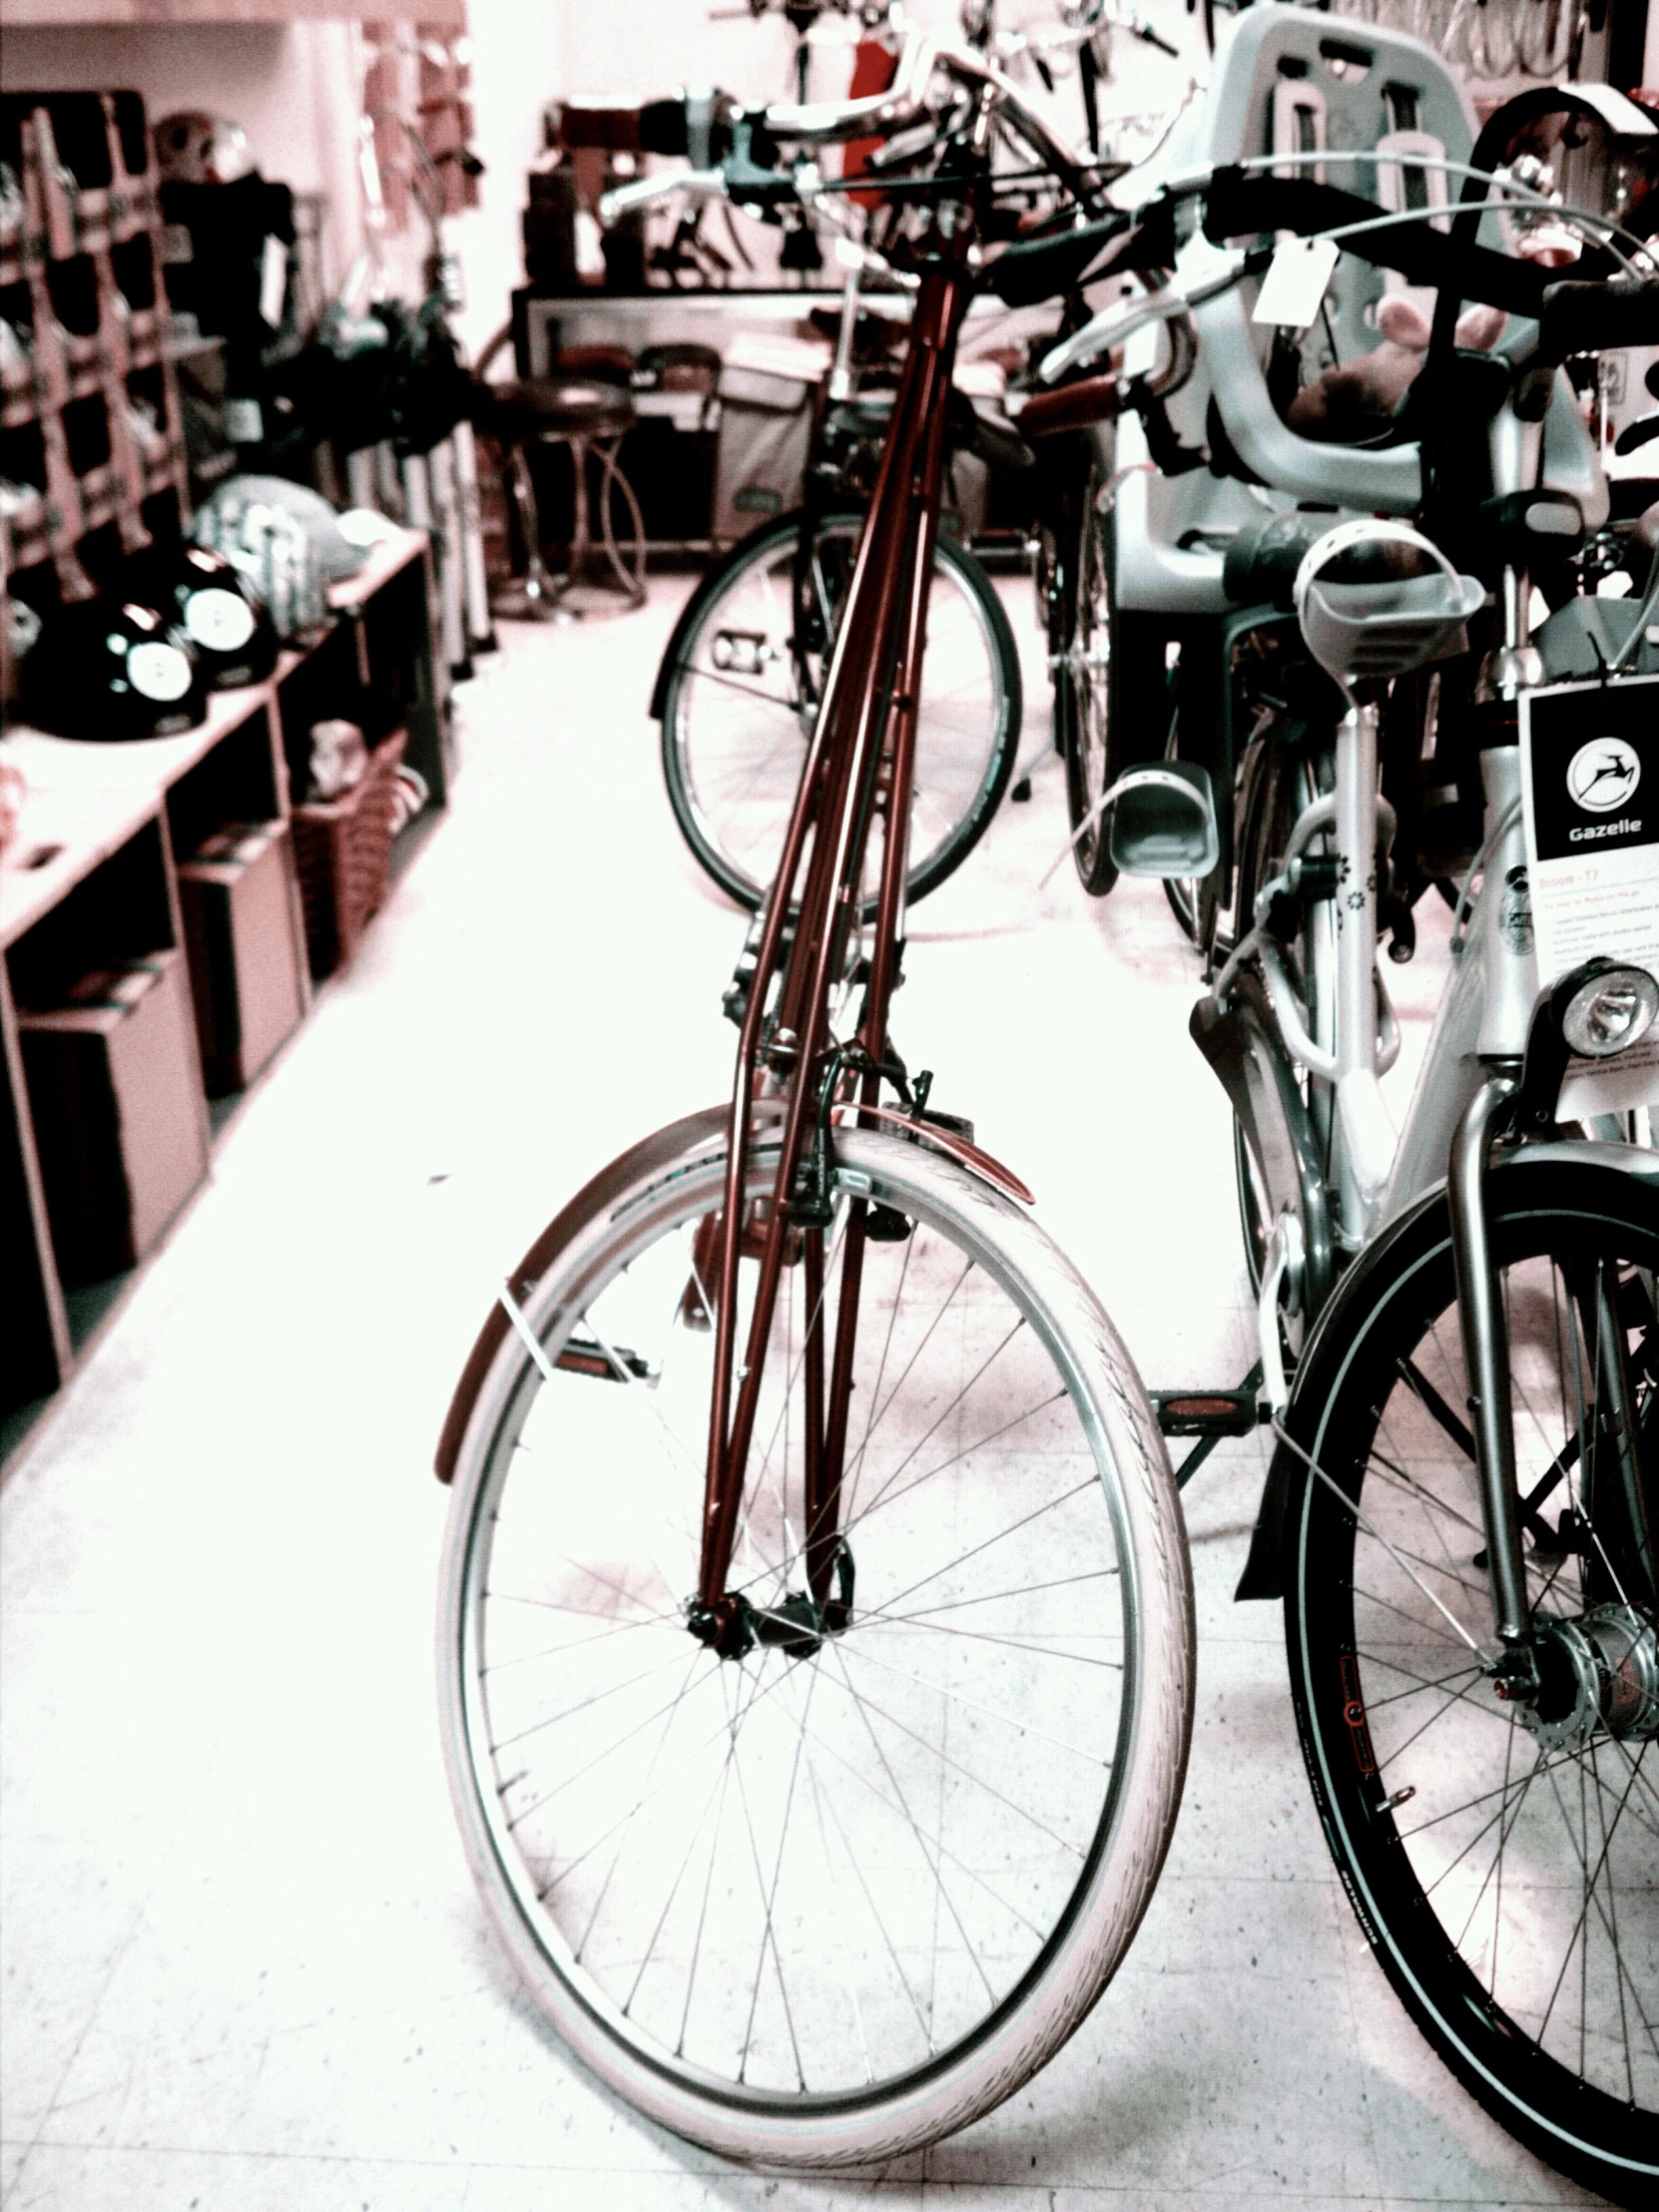 a bicycle is locked inside of a bicycle shop